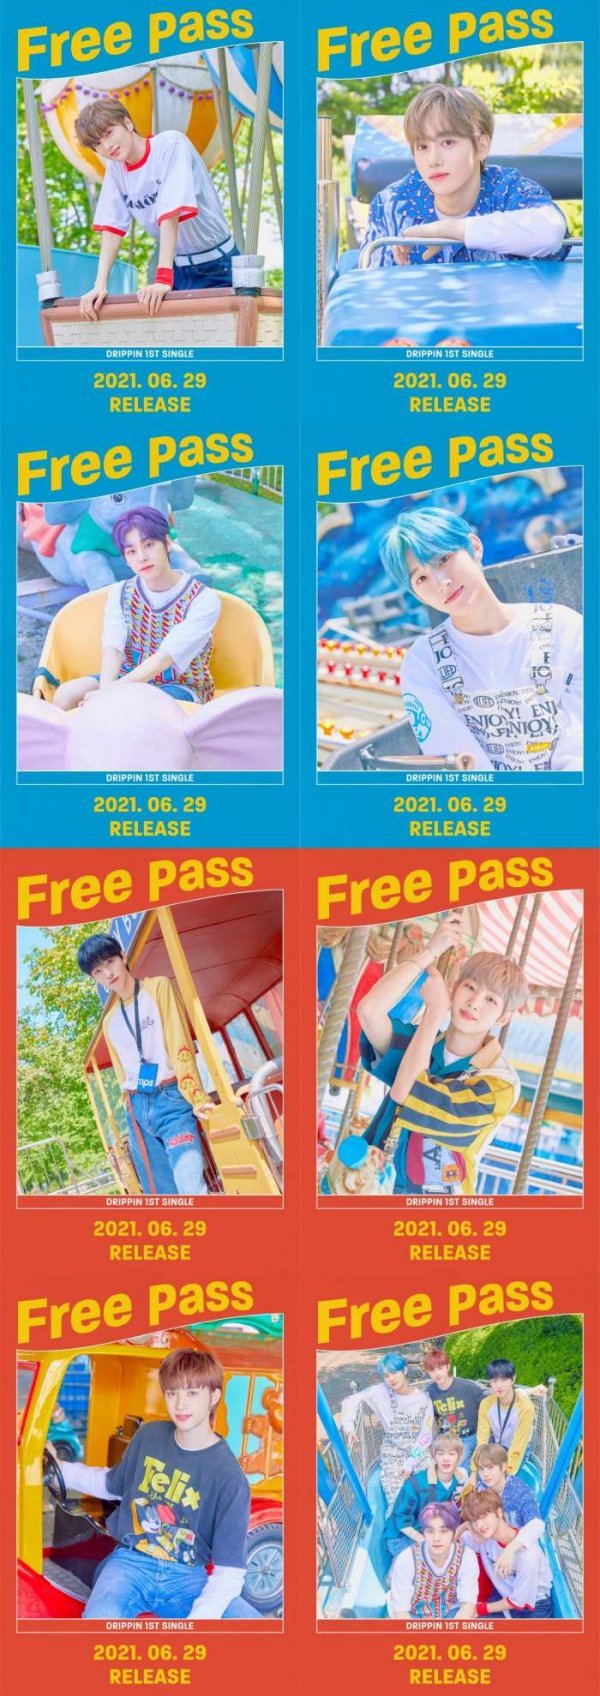 On the 19th, its agency Woollim Entertainment released the first concept photo of the first single Free Pass by dripin (Cha Jun-ho, Hwang Yoon-sung, Kim Dong-yoon, Lee Hyo-hyeop, Joo Chang-wook, Alex, and Kim Min-seo) through the official SNS channel.The photo shows the youthful appearance of the dripin members who seem to enjoy the summer picnic in the background of the amusement park.The members perfected the free and colorful street fashion and unfolded seven colors of seven.In particular, Dripin, who tried to change her colorful hairstyle with different colors such as mint, deep blue, ash, red, and purple, showed off her cool clean visual and caused fans to react hotly.